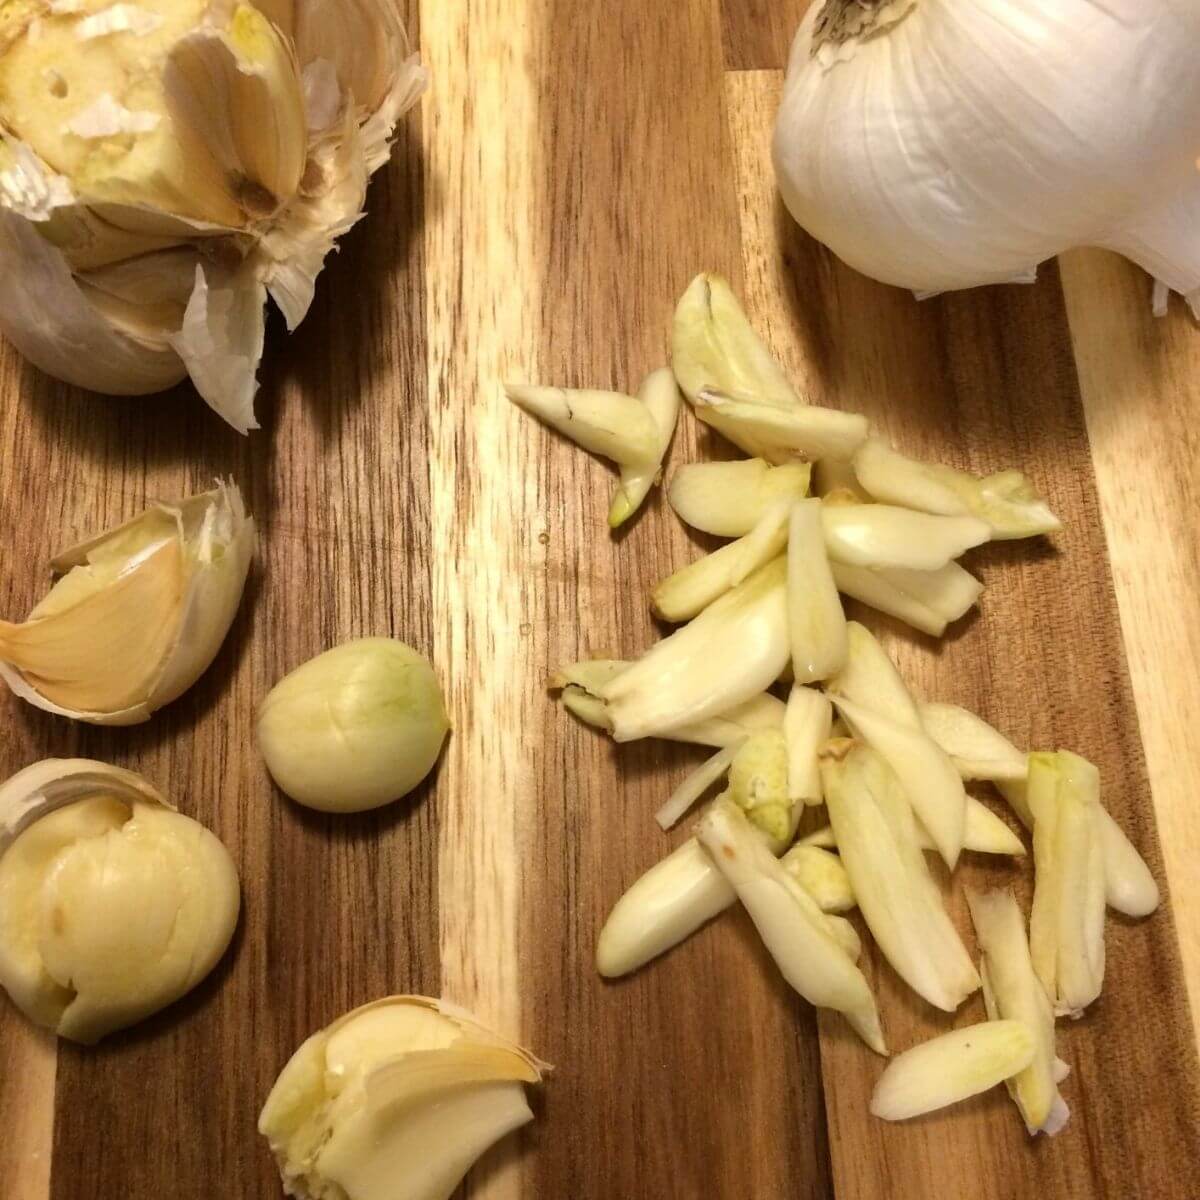 wooden cutting board with a full head of garlic, another head of garlic with the end cut off, 4 smashed garlic cloves semi-peeled, and sliced garlic cloves